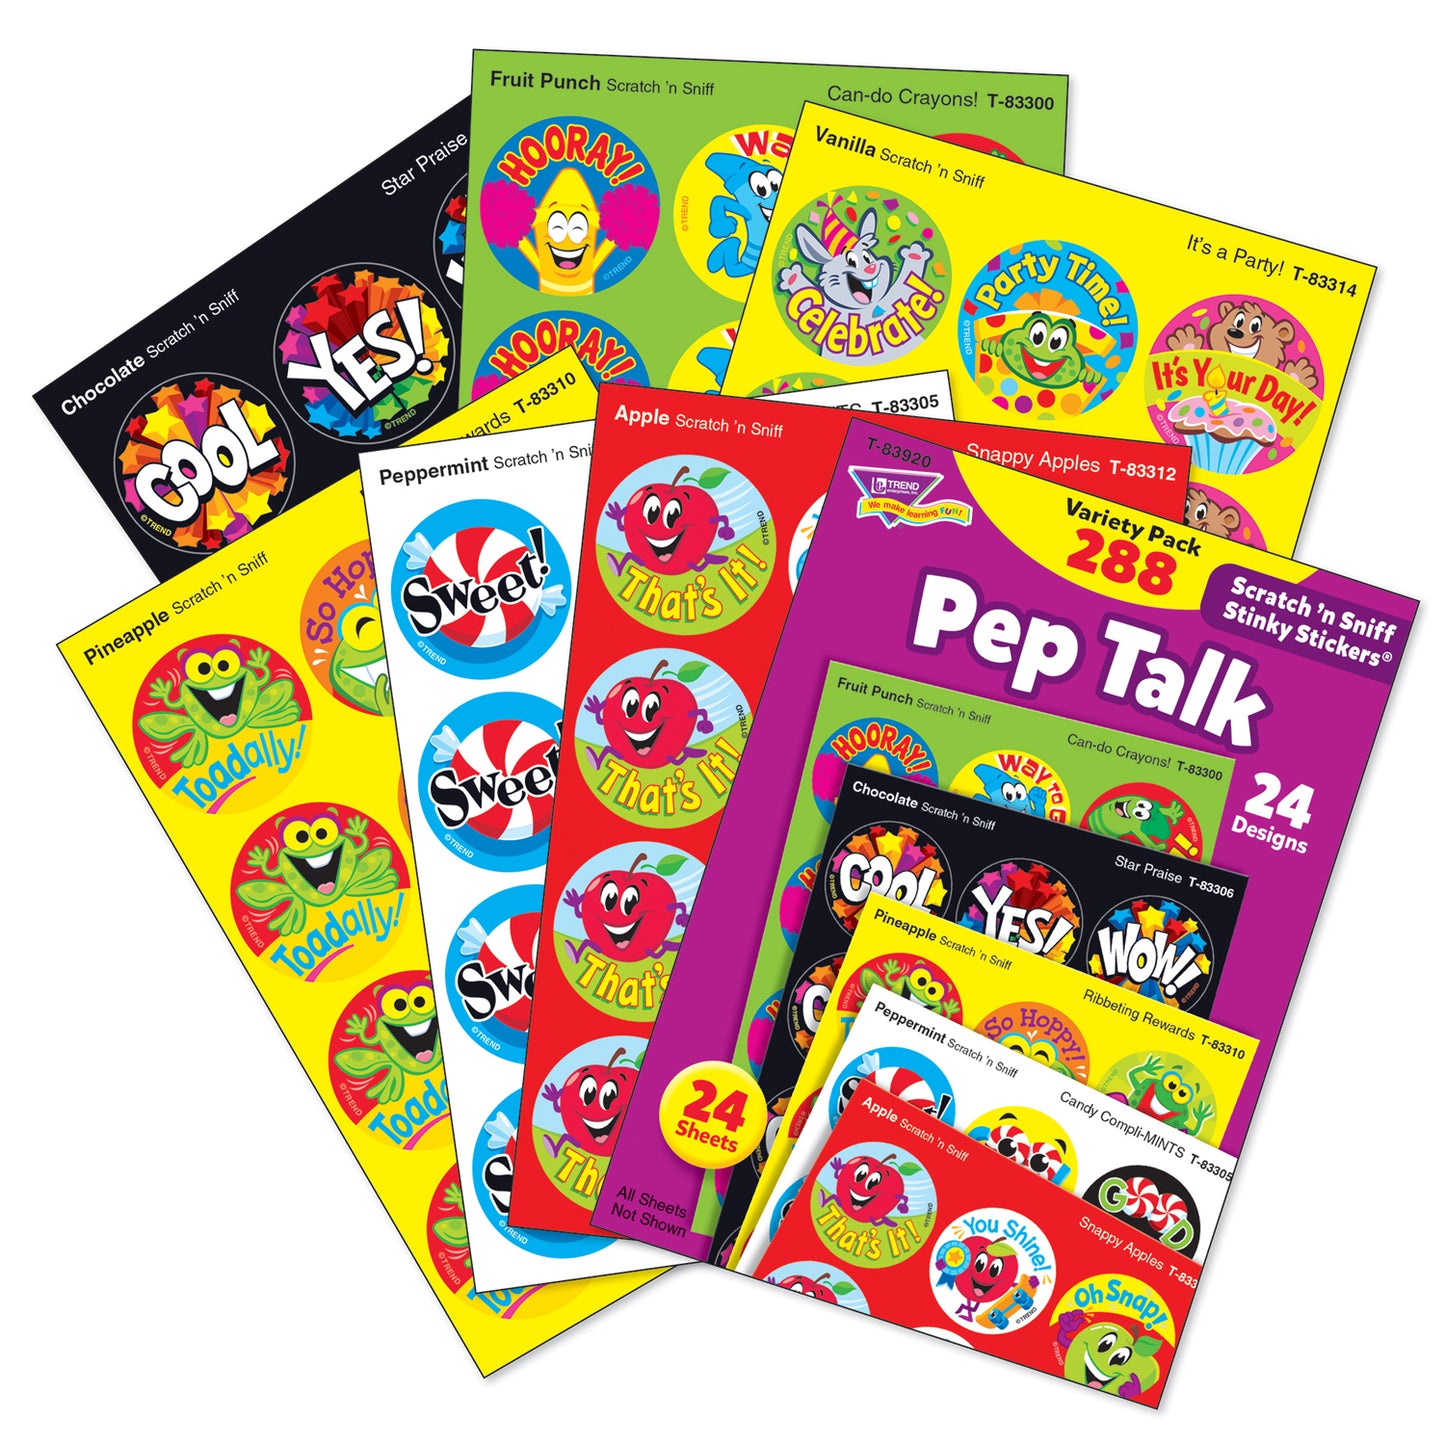 Pep Talk Stinky Stickers® Variety Pack, 288 Count